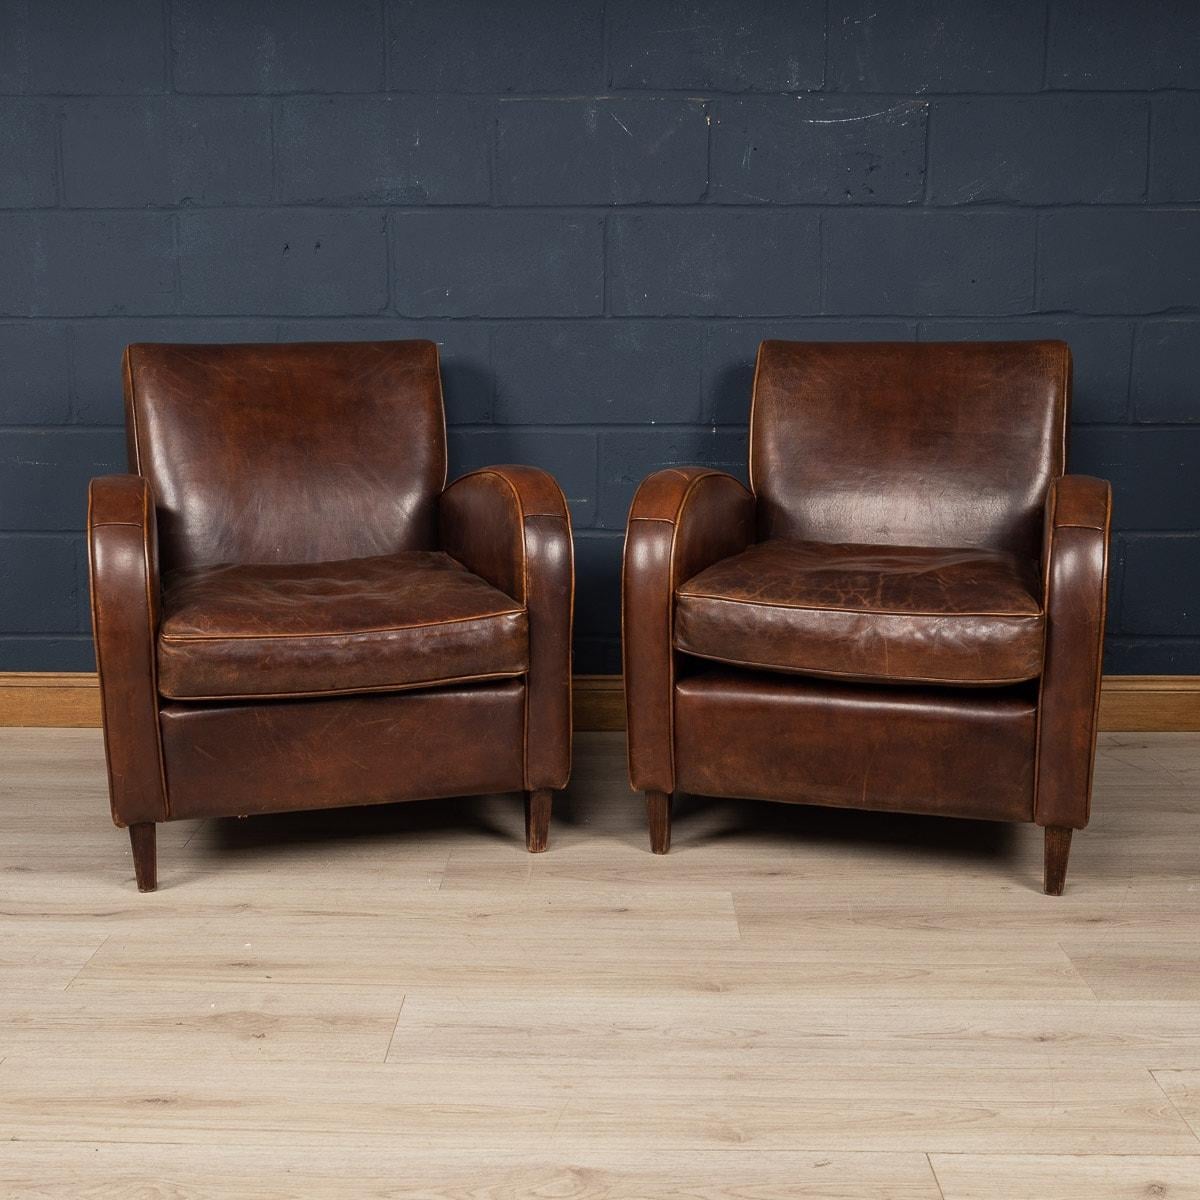 Showing superb patina and colour, this wonderful pair of club chairs were hand upholstered sheepskin leather in Holland by the finest craftsmen in the latter part of the 20th century.

CONDITION
In Good Condition: some wear consistent with normal